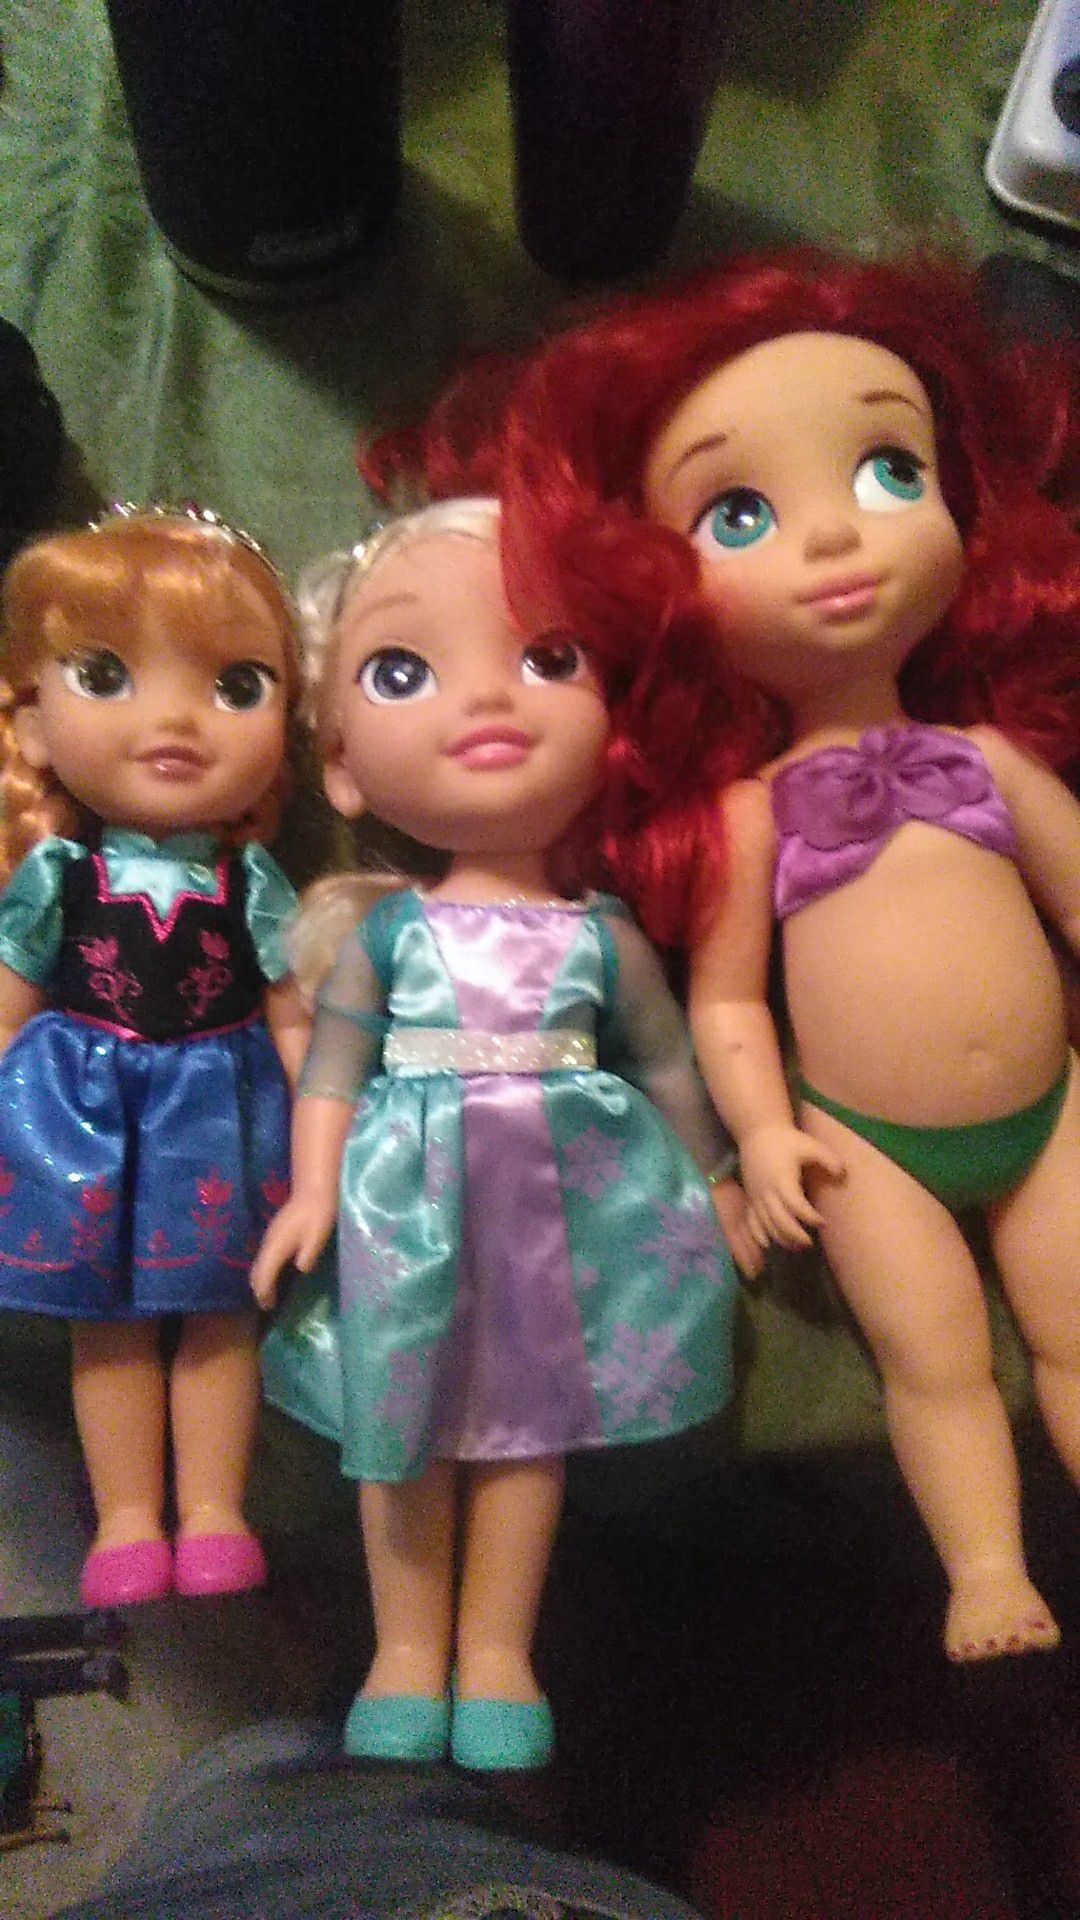 Frozen and lil mermaid dolls